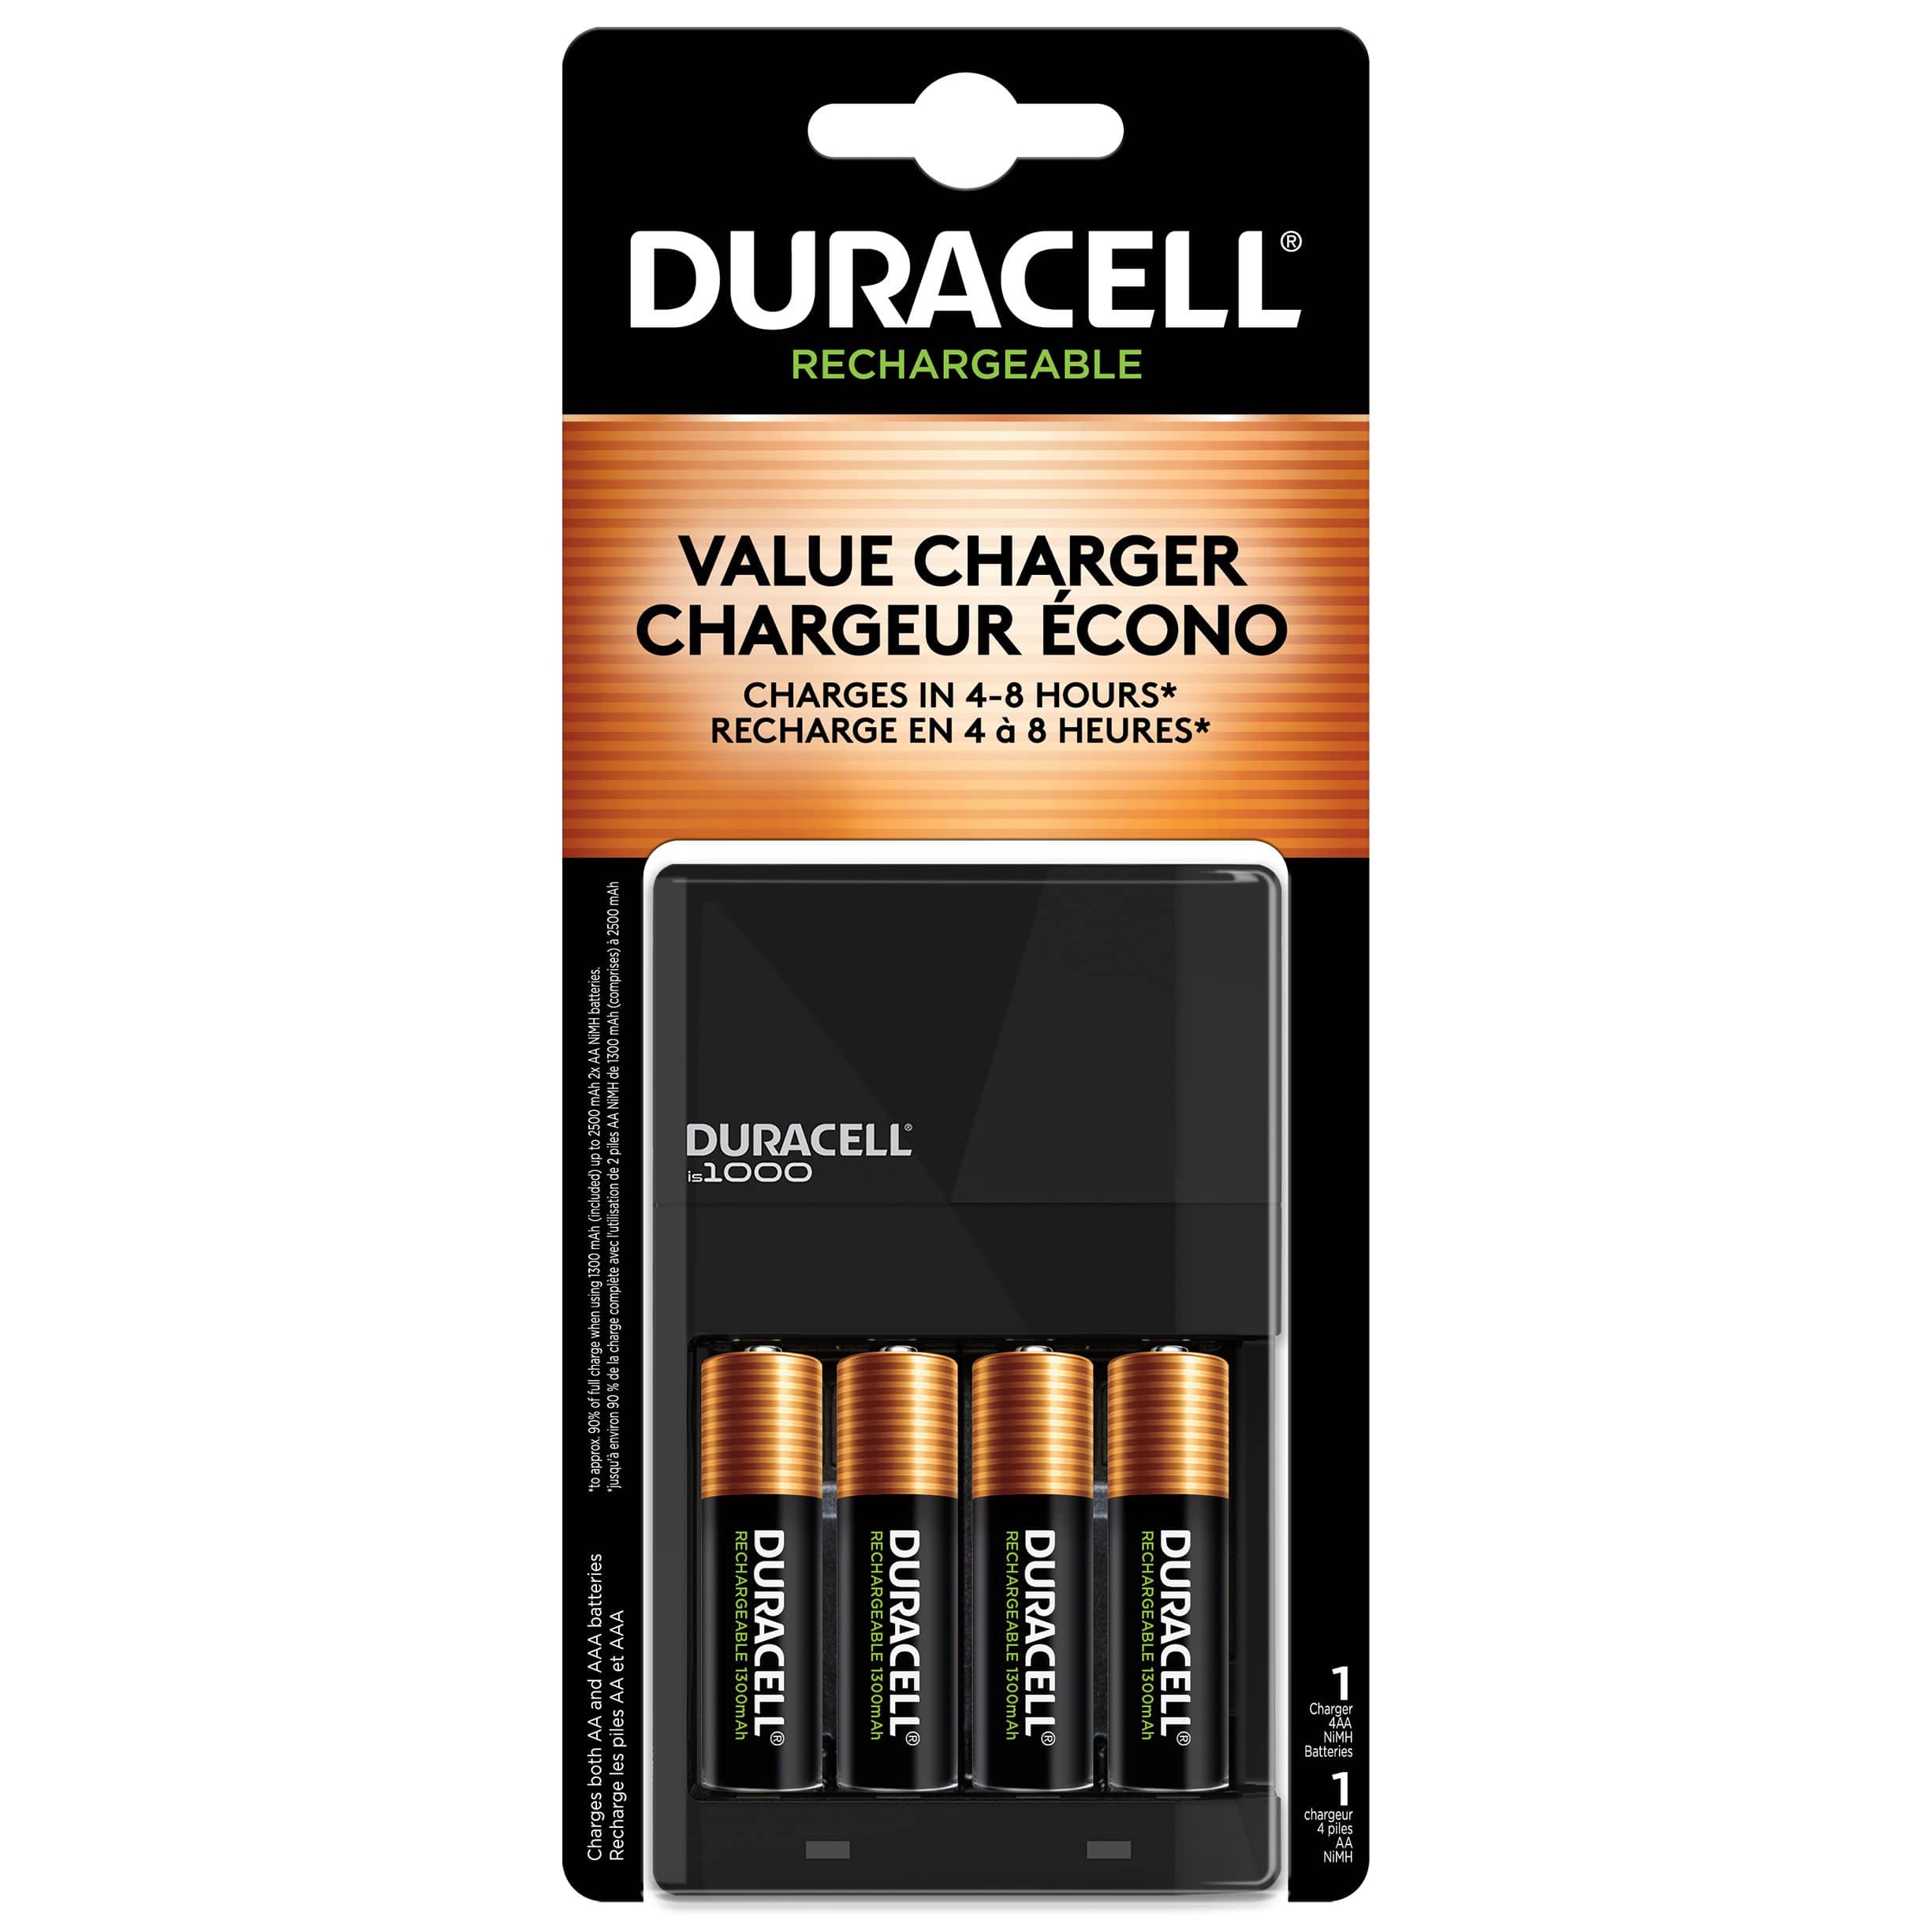 Chargeur Piles Rechargeables AA et AAA - 4 Piles AA Minh Rechargeables  incluses, 100%PEAKPOWER, Chargeur Rapide avec USB 4 Piles